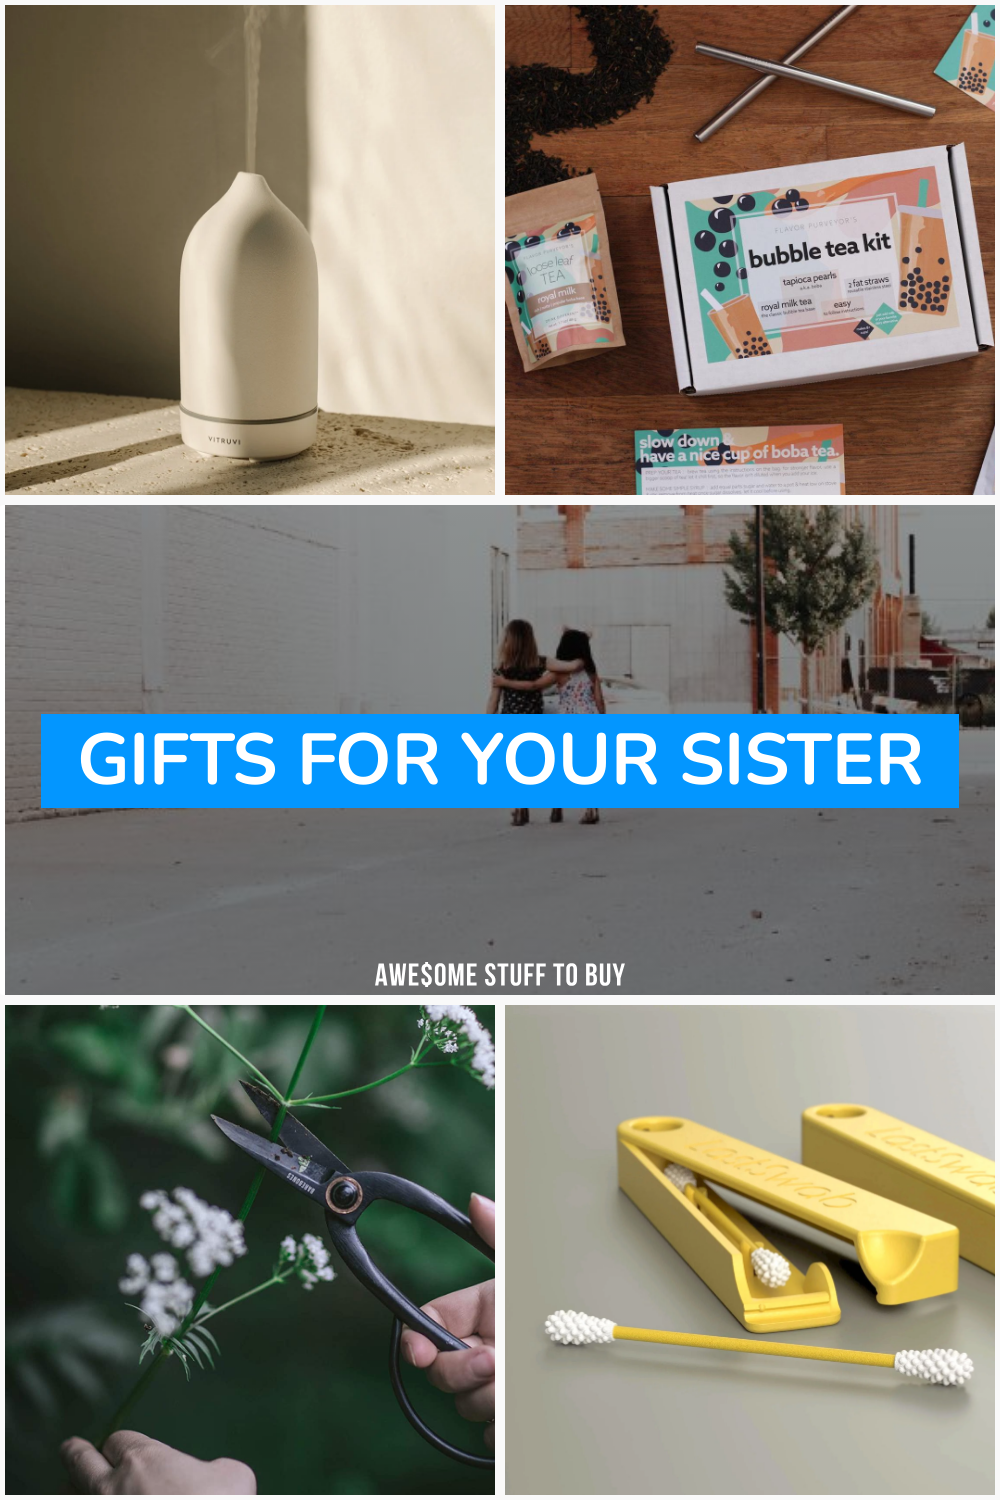 Gifts For Your Sister // Awesome Stuff to Buy